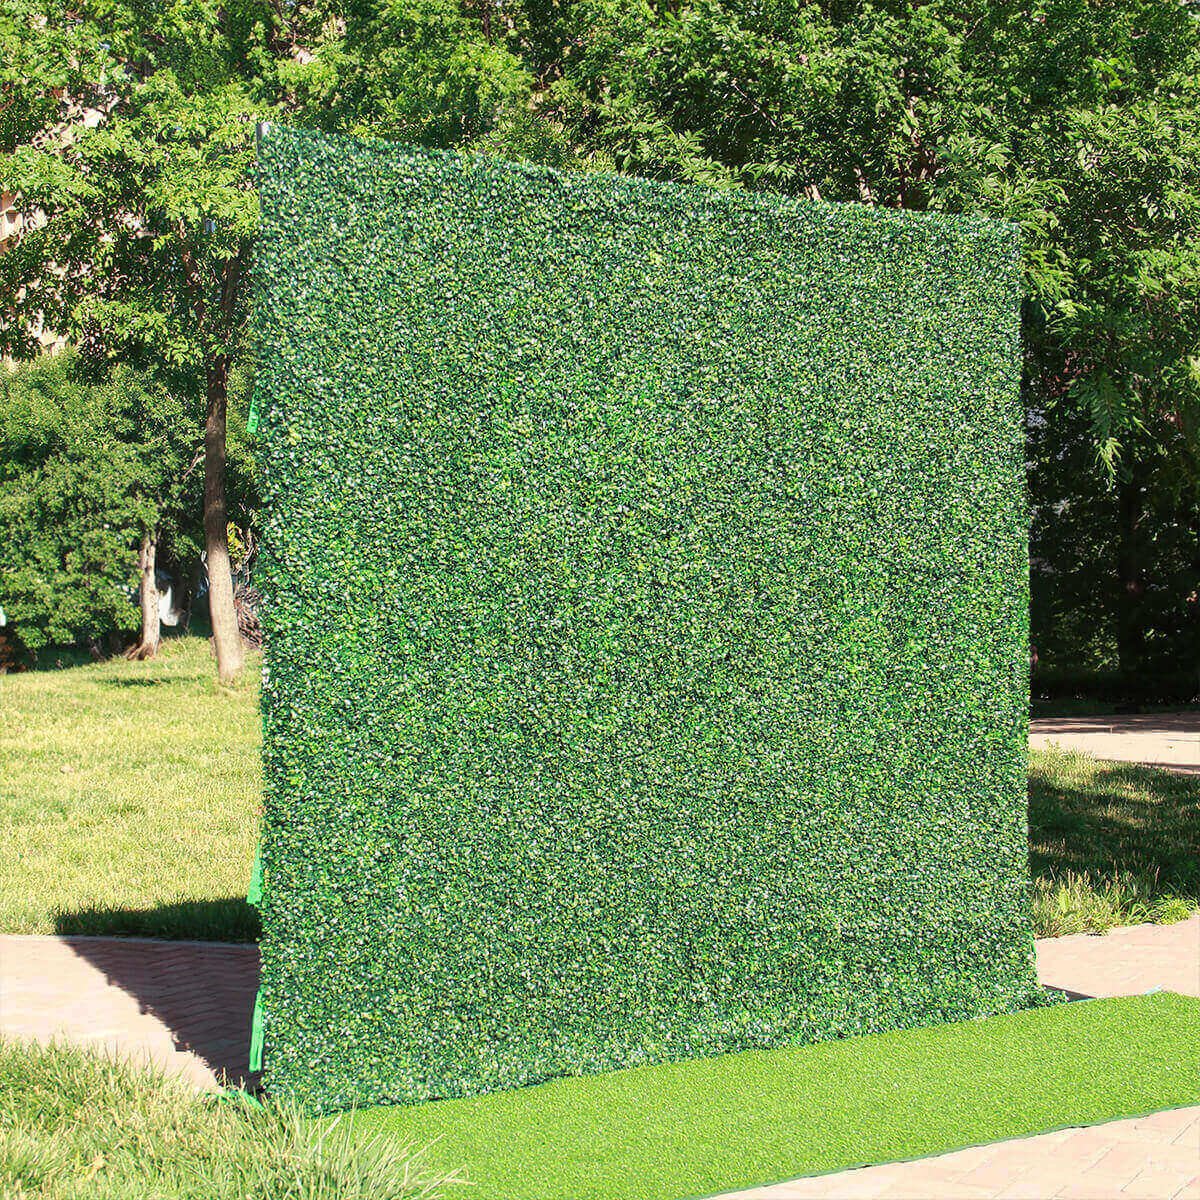 Green Hedge Wall Rental 2 - Riverside Flower Wall Rental - Perfect Capture Booth | Photo Booth Rental.jpeg